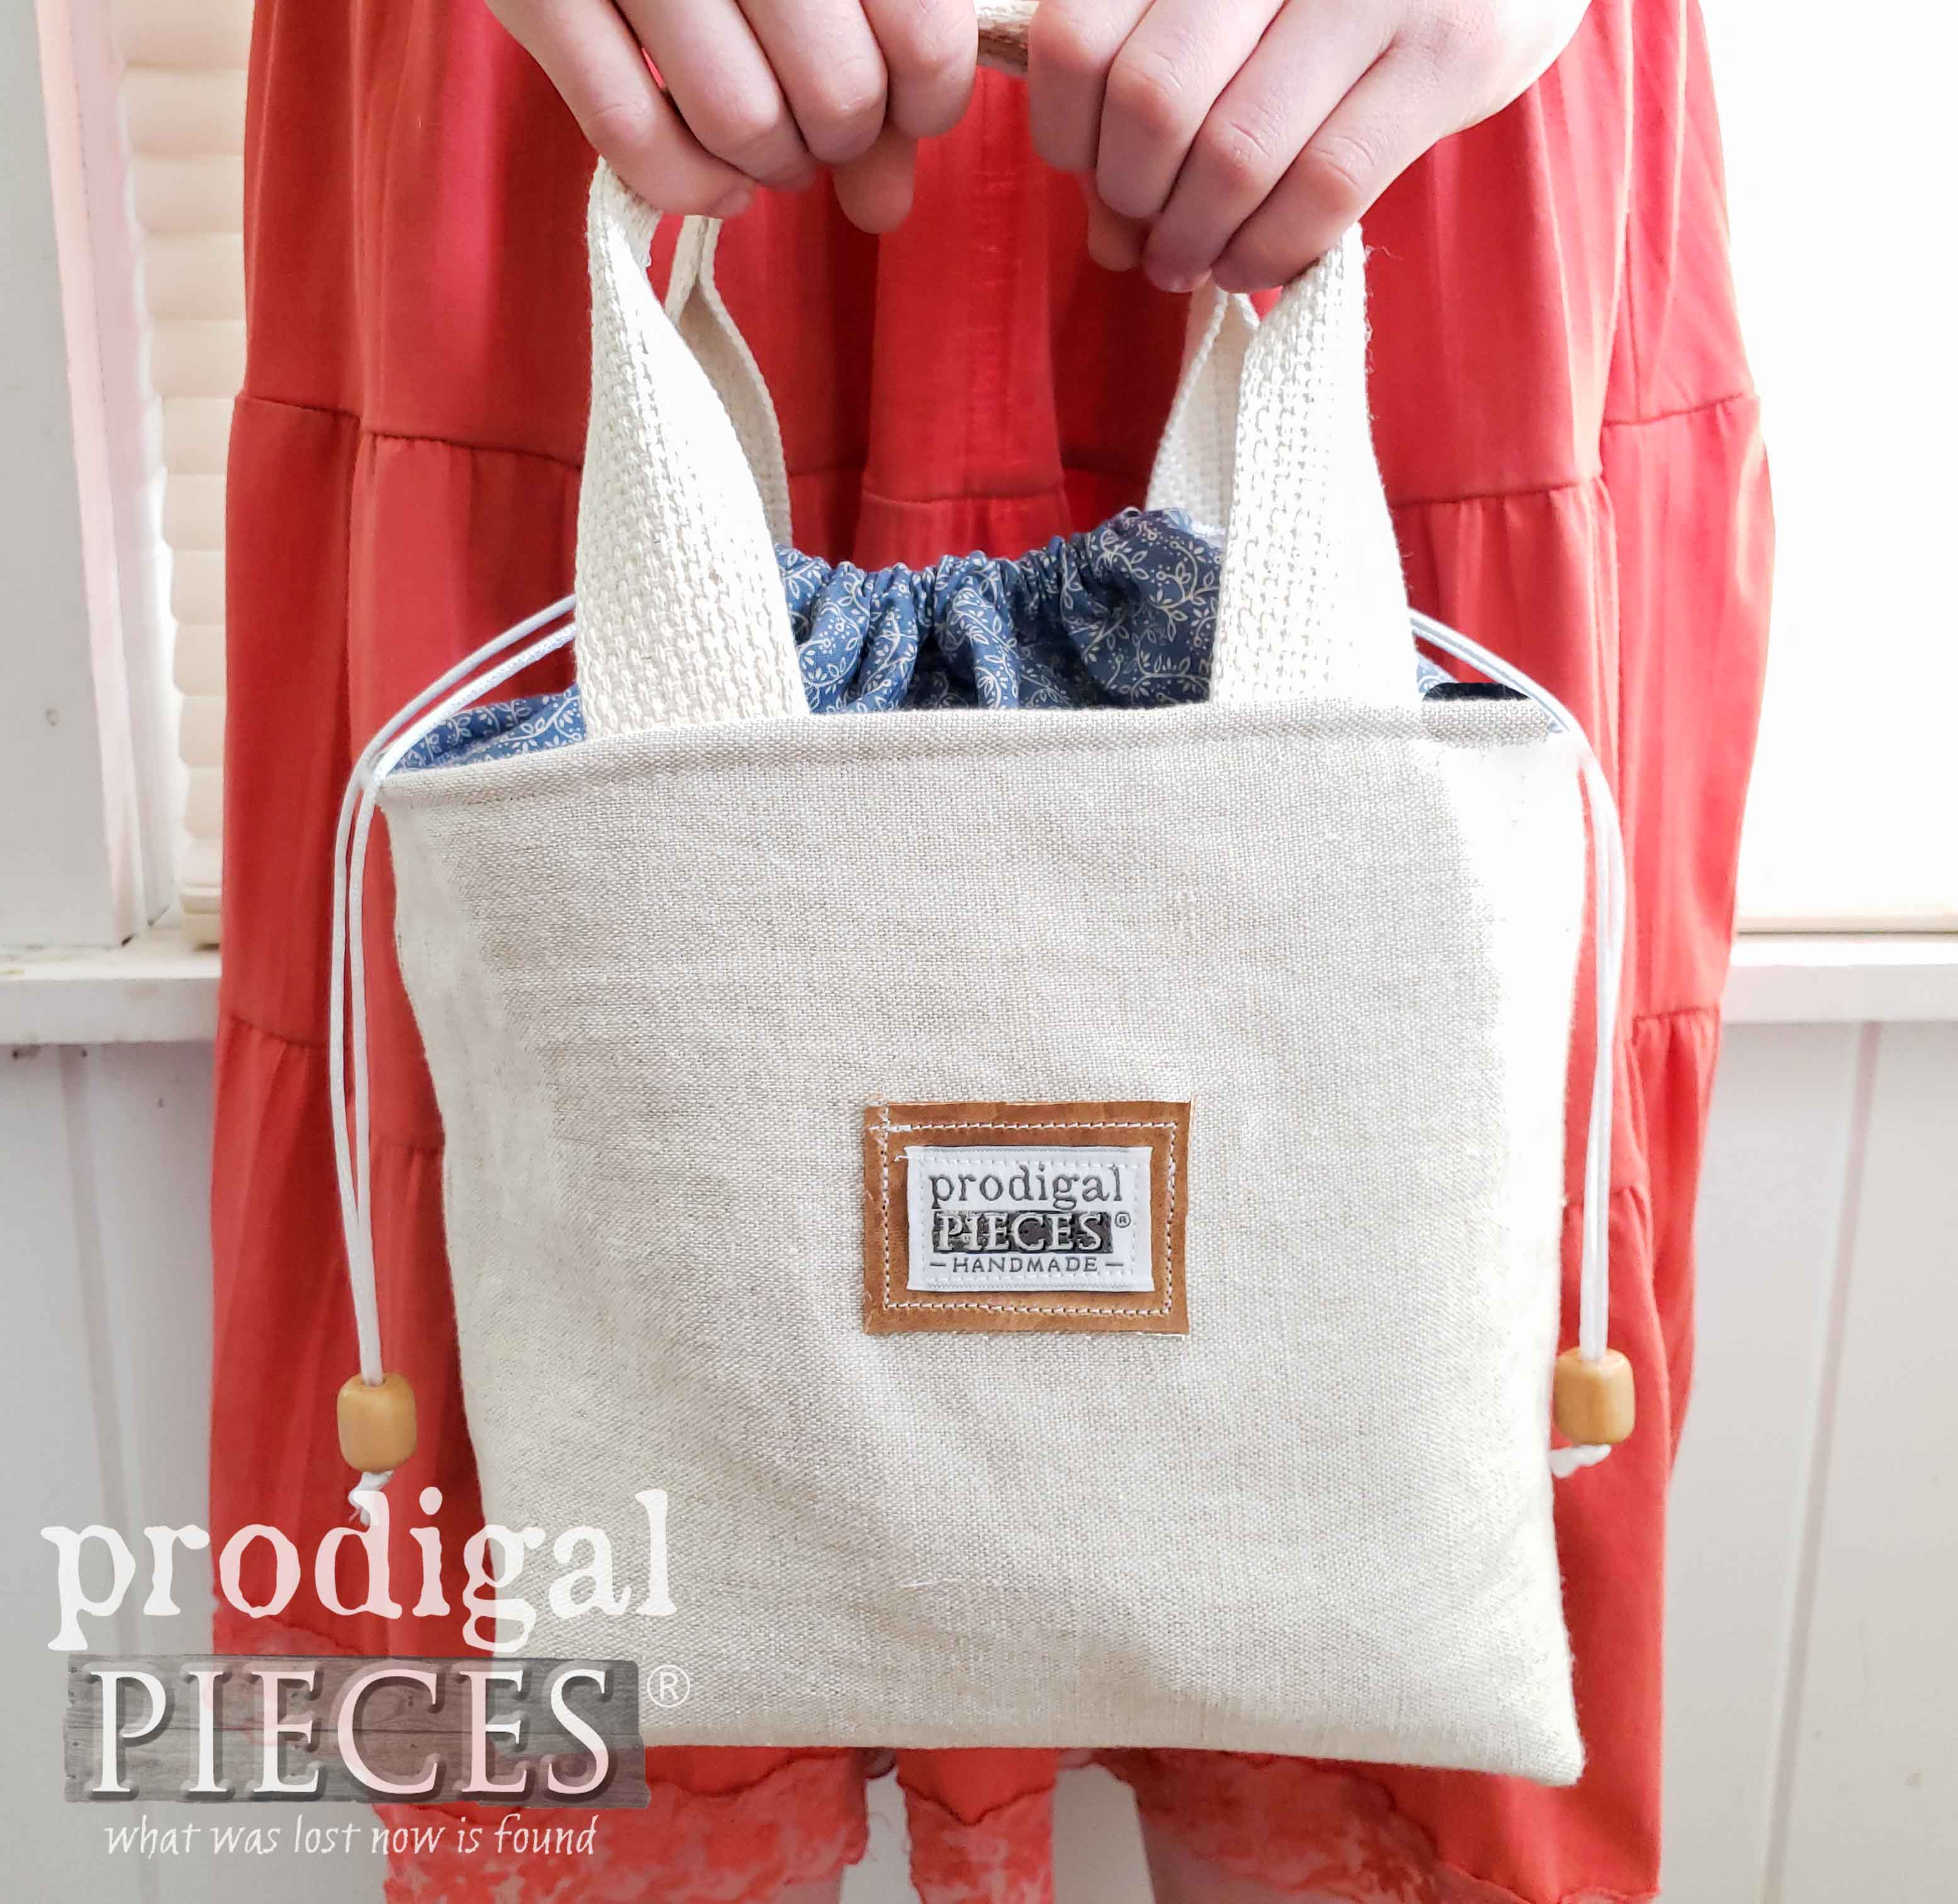 Handmade Linen Lunch Bag made from Upcycled Skirts by Larissa of Prodigal Pieces | prodigalpieces.com #prodigalpieces #handmade #sewing #fashion